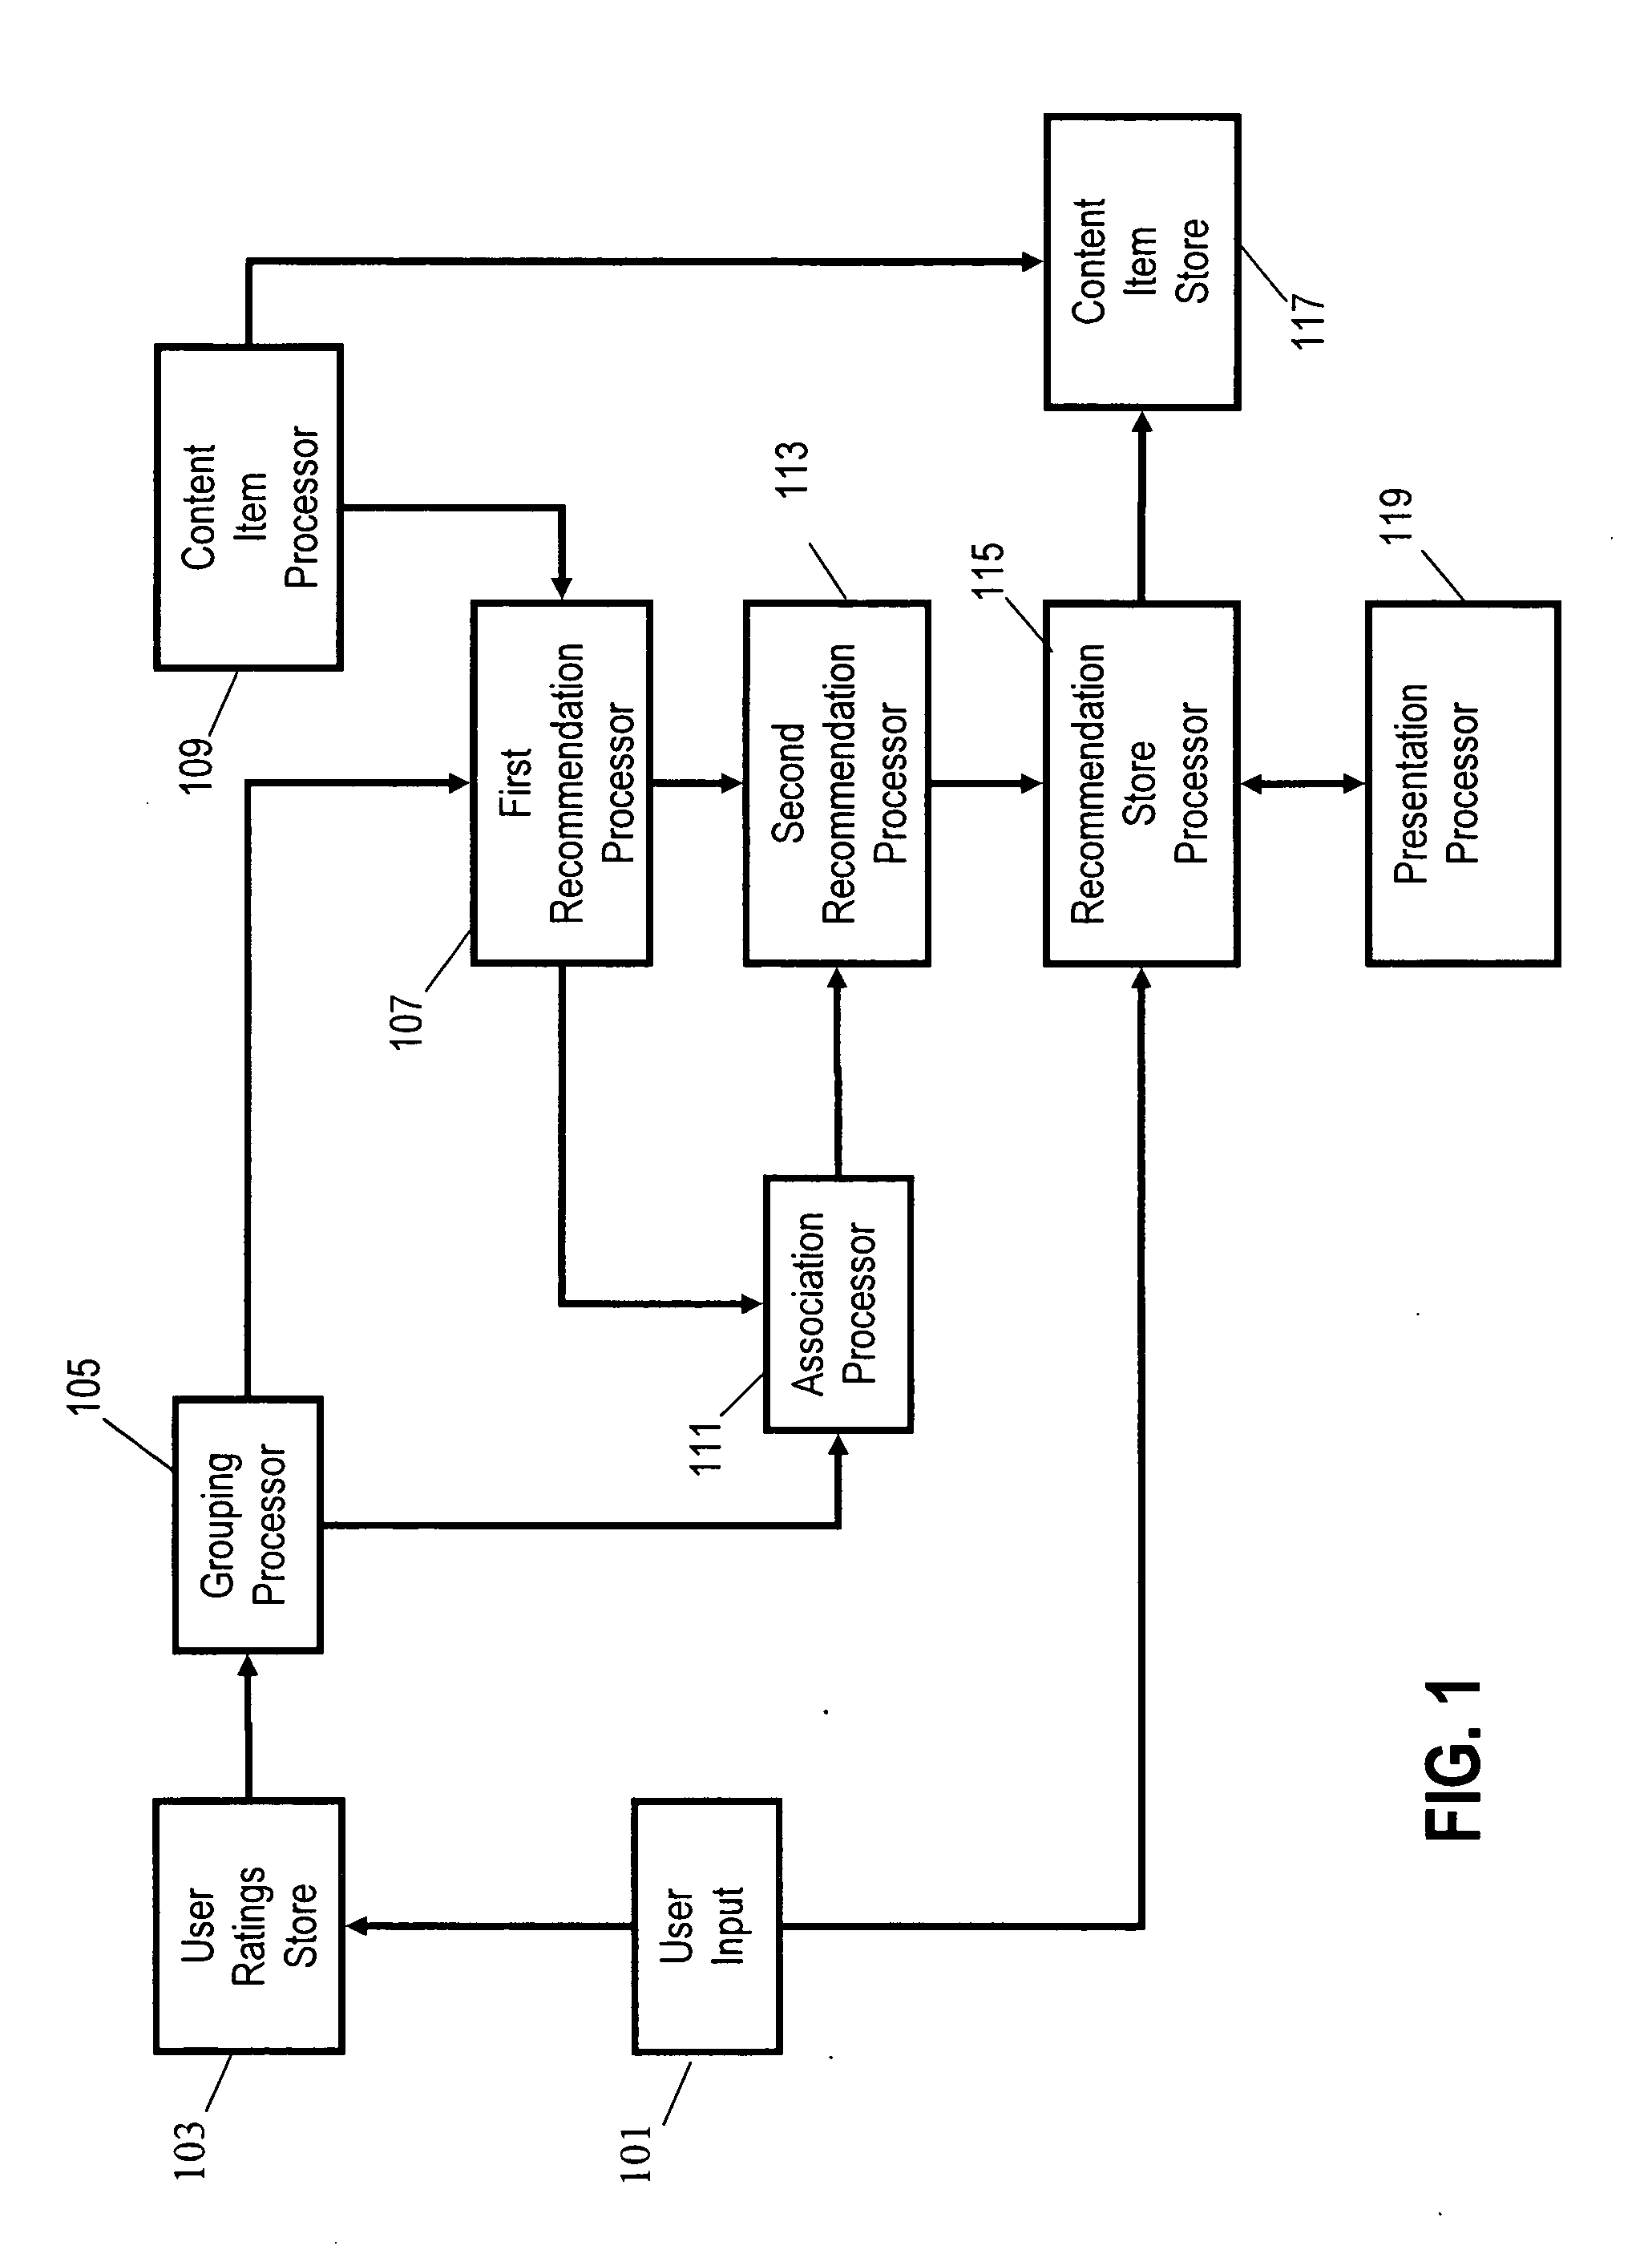 Method and apparatus for content item recommendation